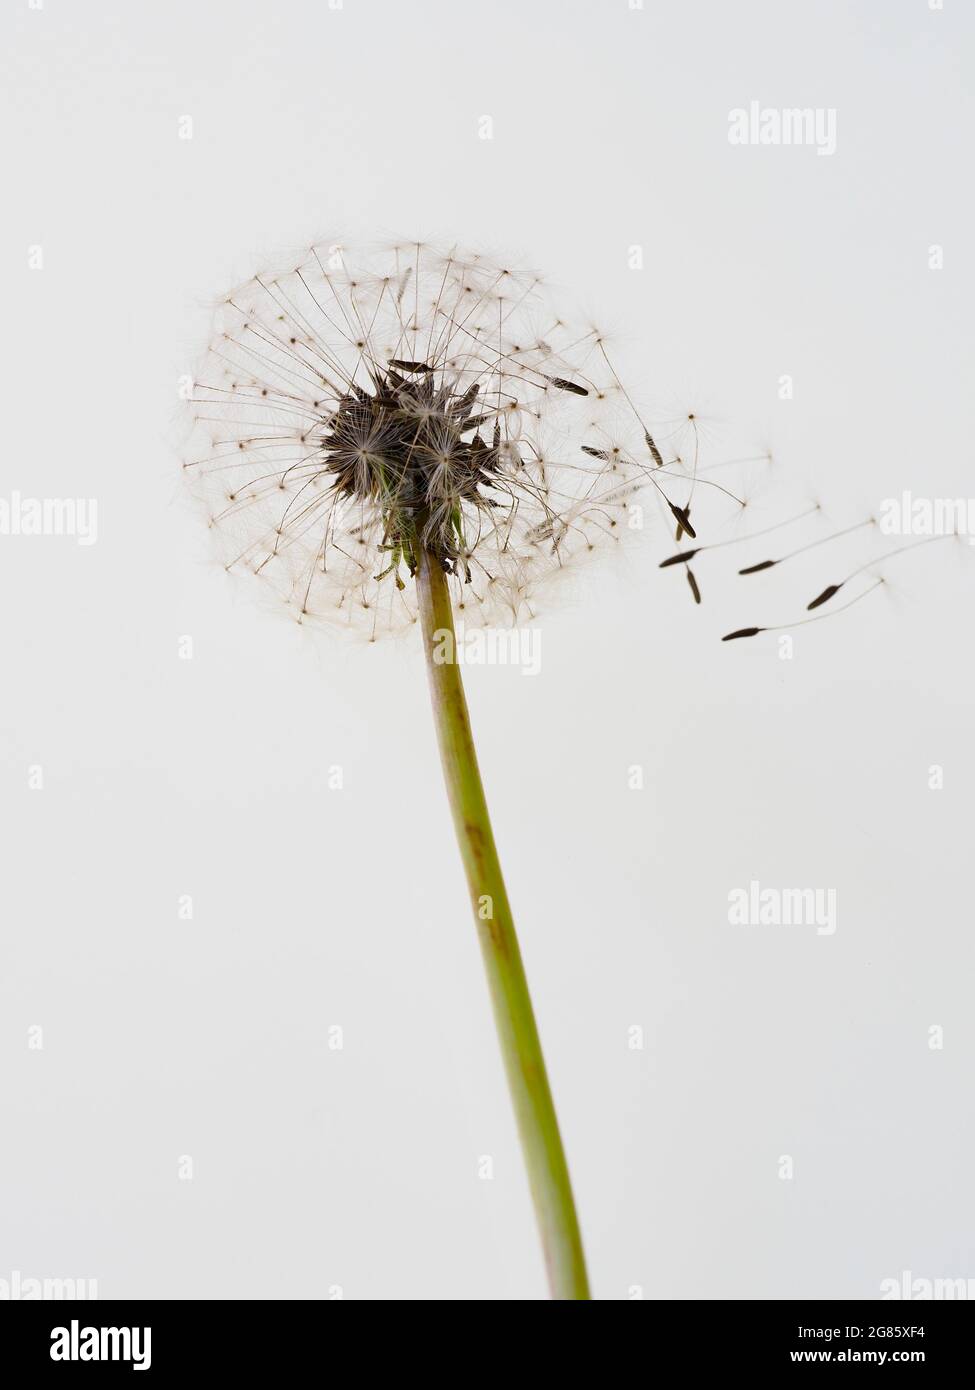 Dandelion seed head seen in close-up  Stock Photo